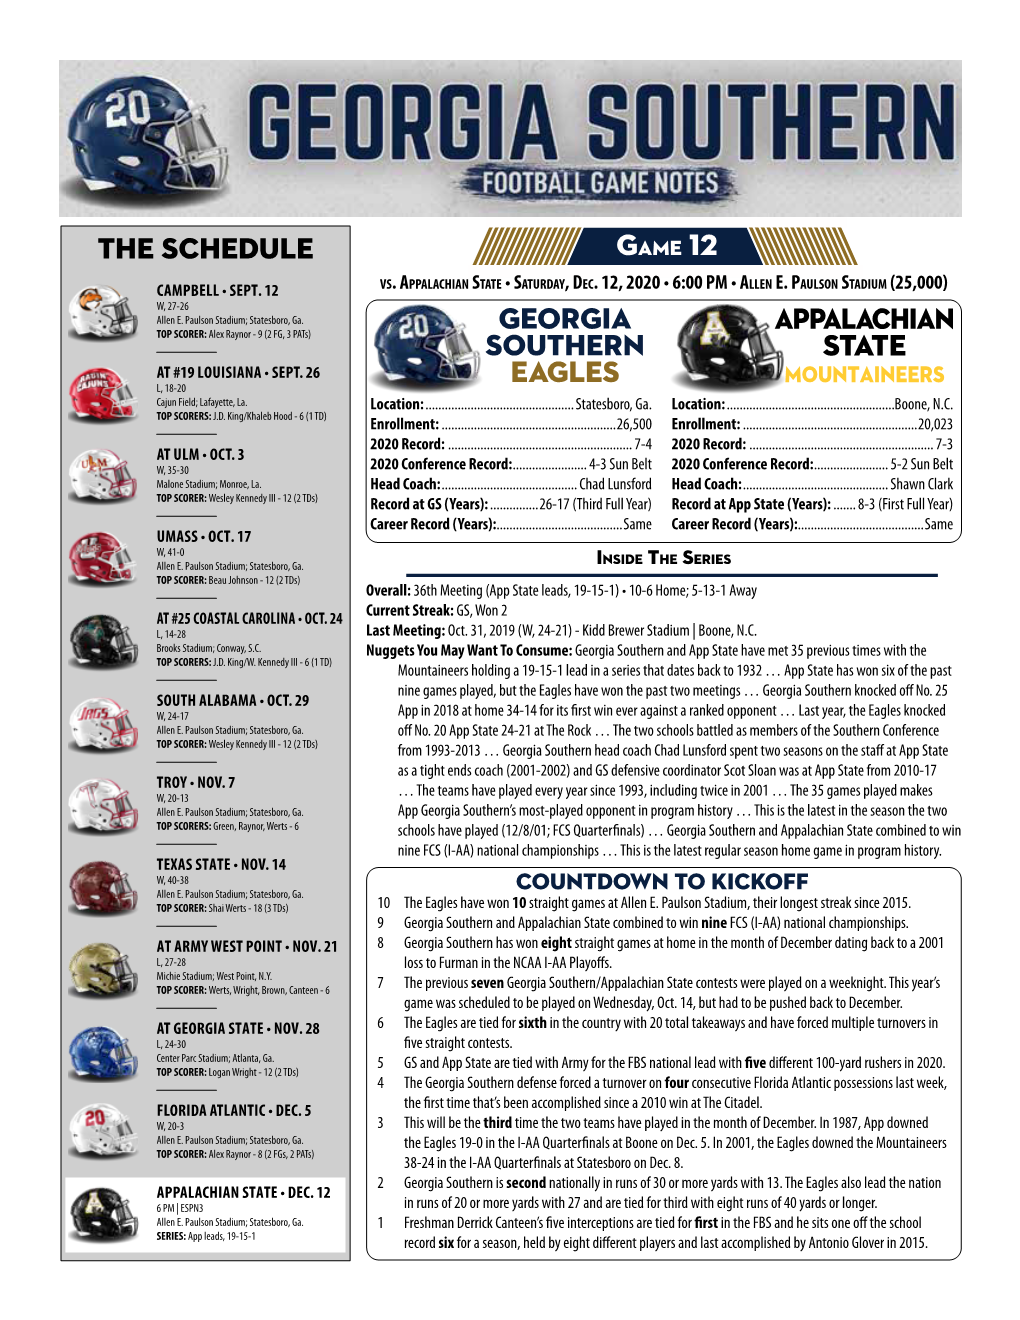 GEORGIA SOUTHERN EAGLES APPALACHIAN STATE the Schedule